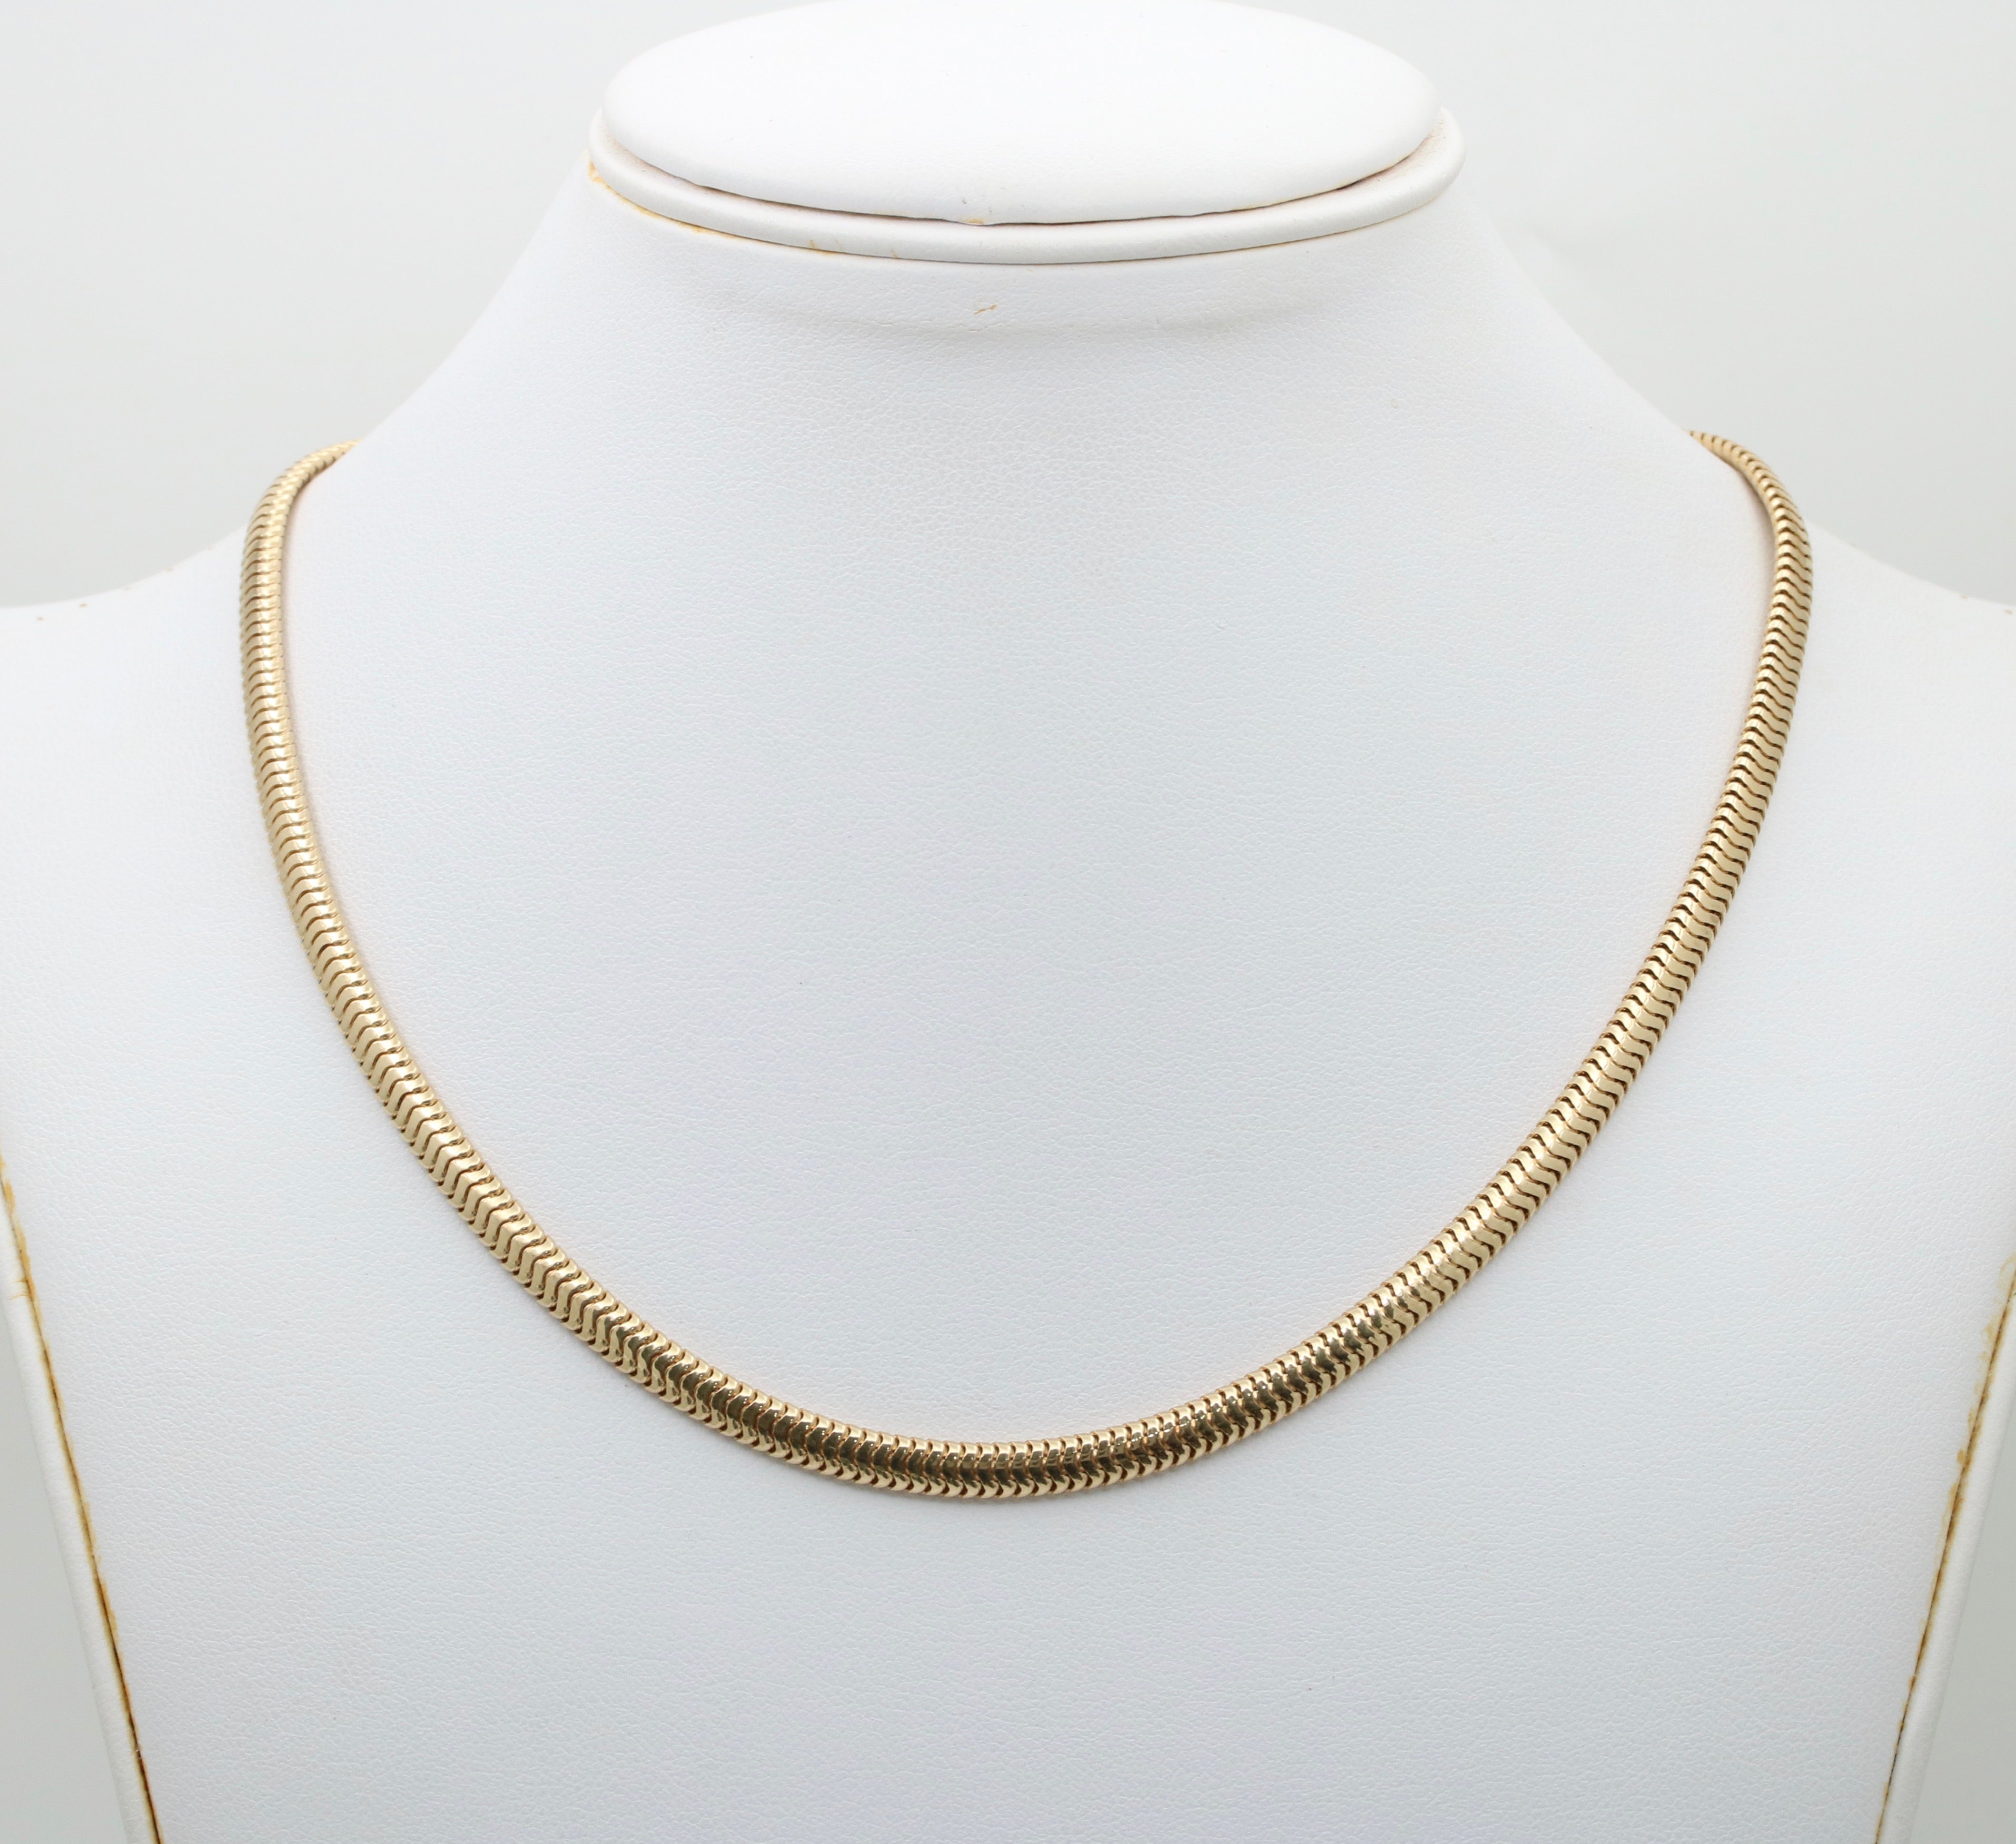 Vintage | 14K Gold Snake Chain Necklace at Voiage Jewelry